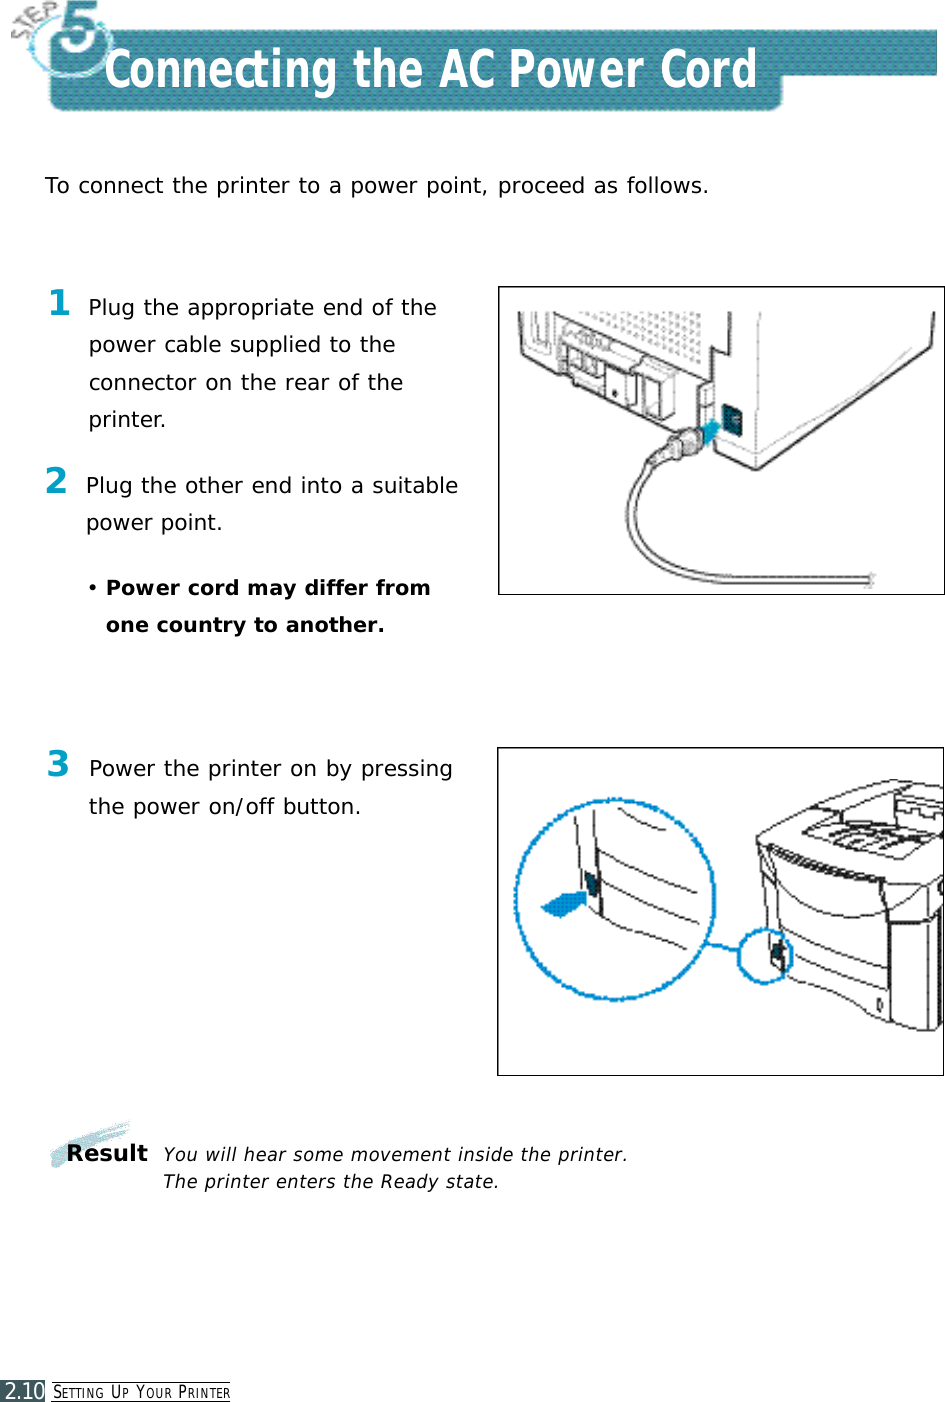 SE T T I N G UPYO U R PR I N T E R2.10Connecting the AC Power CordTo connect the printer to a power point, proceed as follows.1Plug the appropriate end of thepower cable supplied to the connector on the rear of theprinter.2Plug the other end into a suitable power point.•Power cord may differ fromone country to another.3Power the printer on by pressingthe power on/off button.ResultYou will hear some movement inside the printer. The printer enters the Ready state.